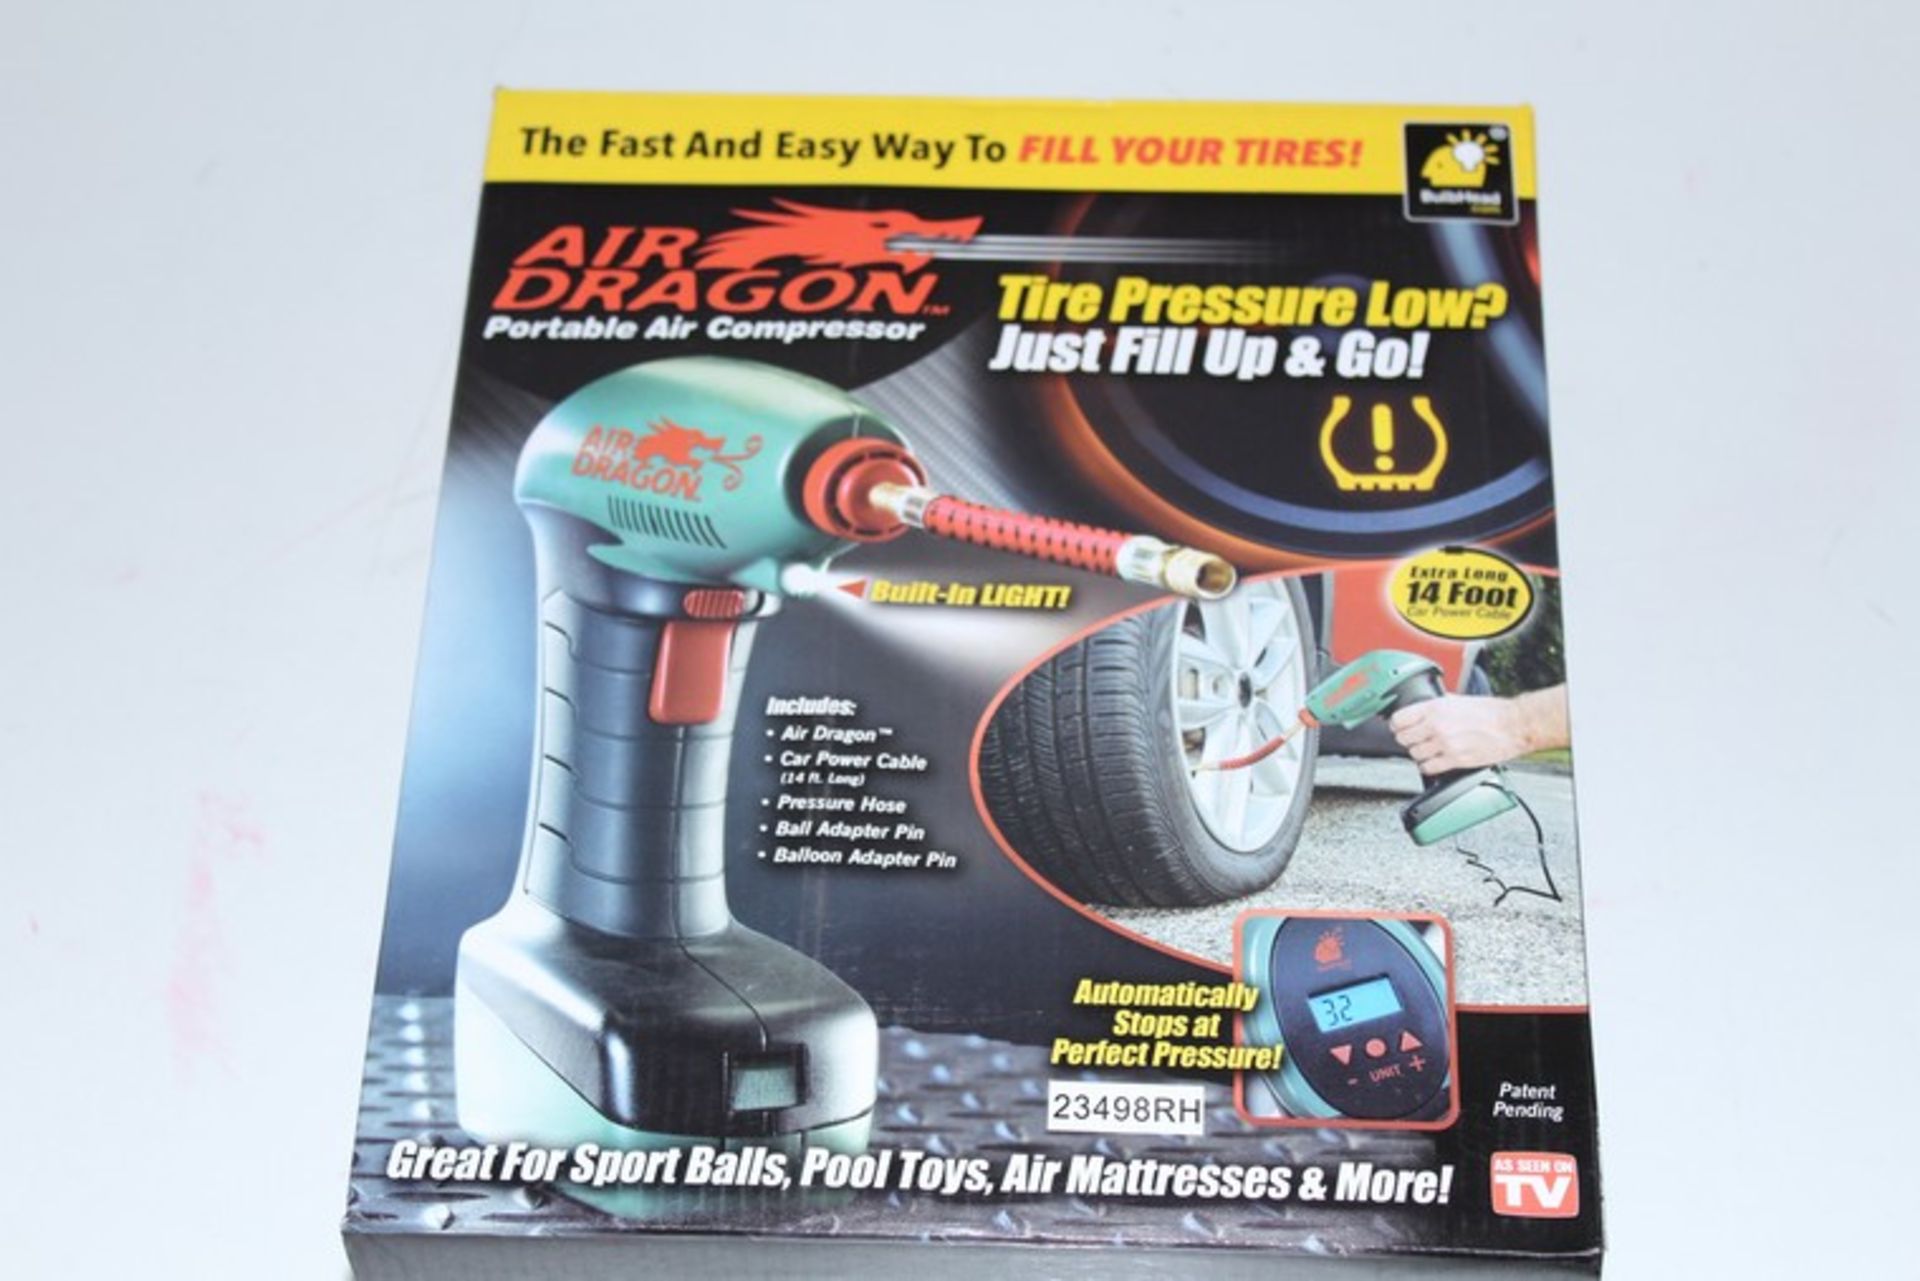 3 x BOXED AIR DRAGON PORTABLE AIR COMPRESSORS *PLEASE NOTE THAT THE BID PRICE IS MULTIPLIED BY THE